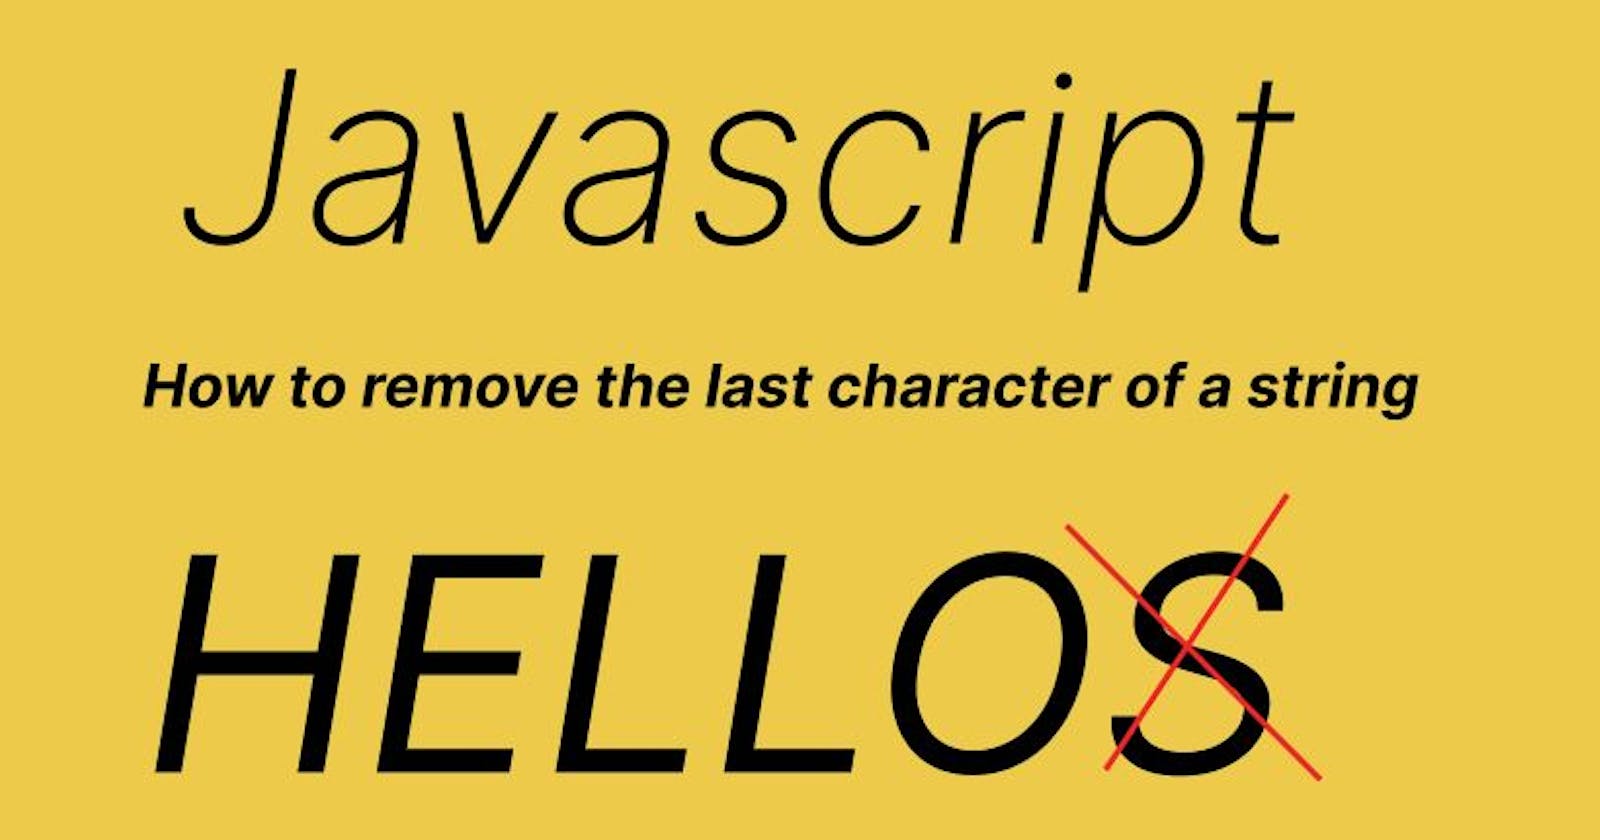 How to remove the last character of a string in Javascript